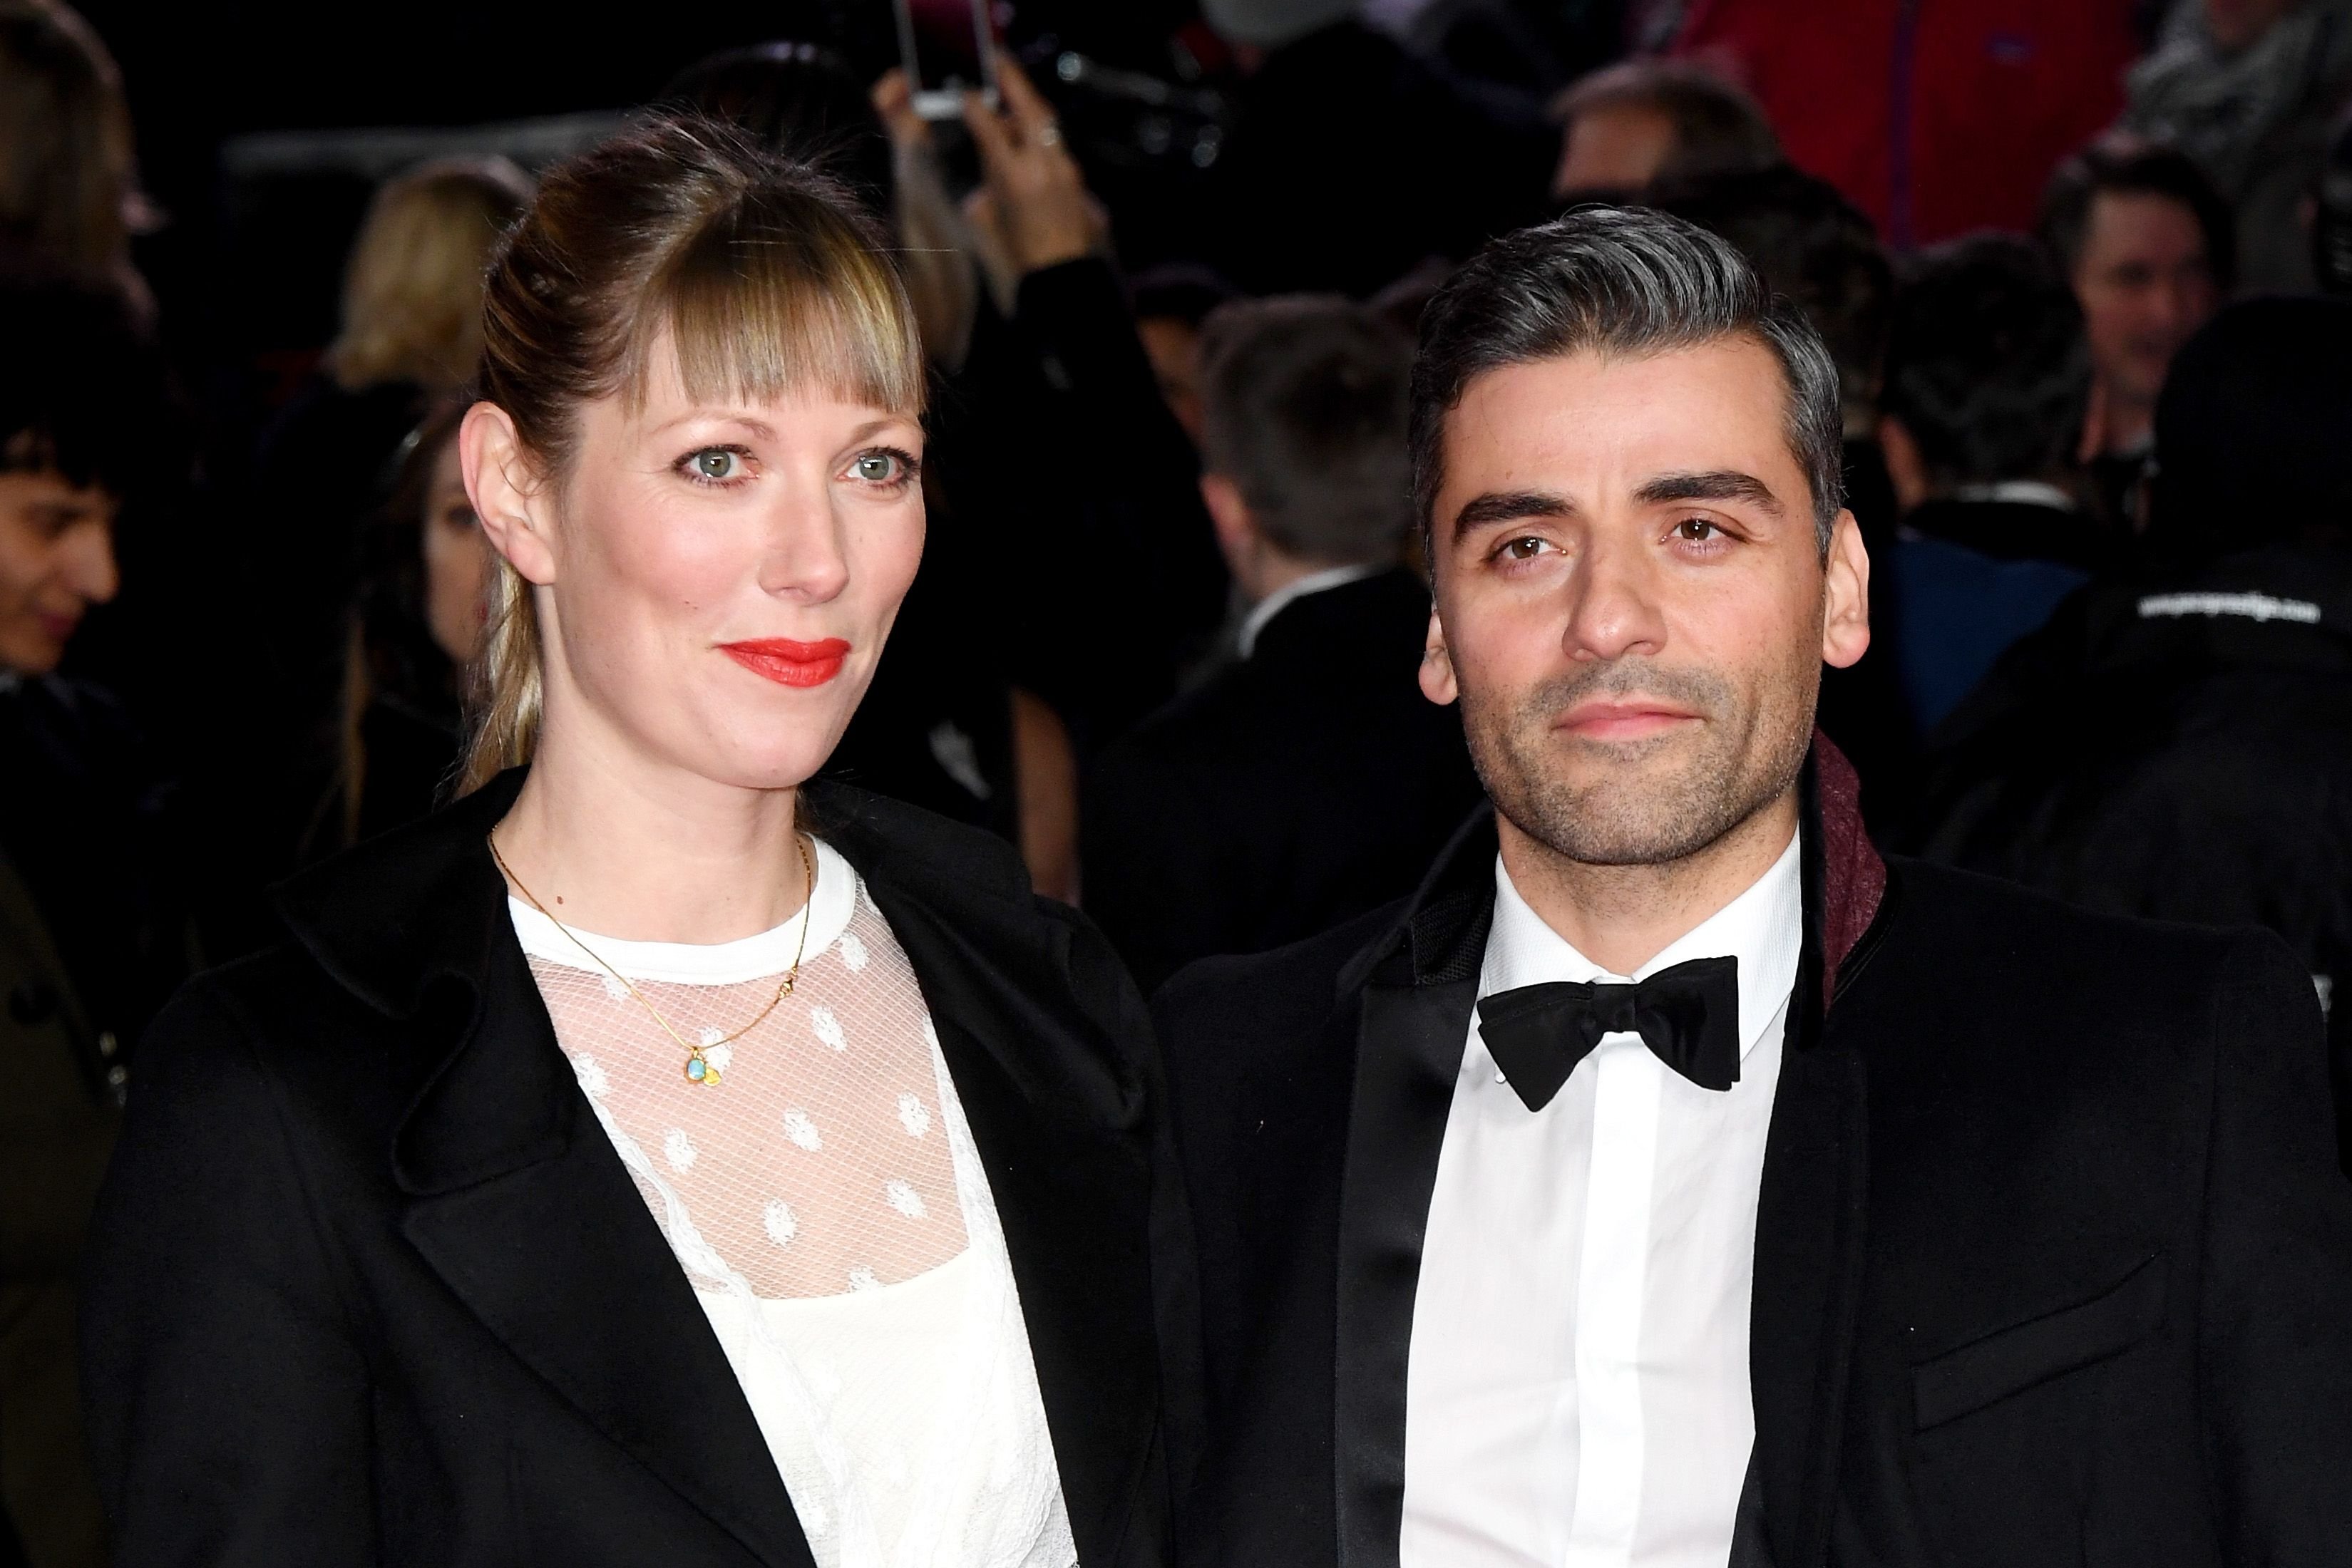 Oscar Isaac and director Elvira Lind at the premiere of "Star Wars: The Last Jedi" in December 2017 in London | Source: Getty Images